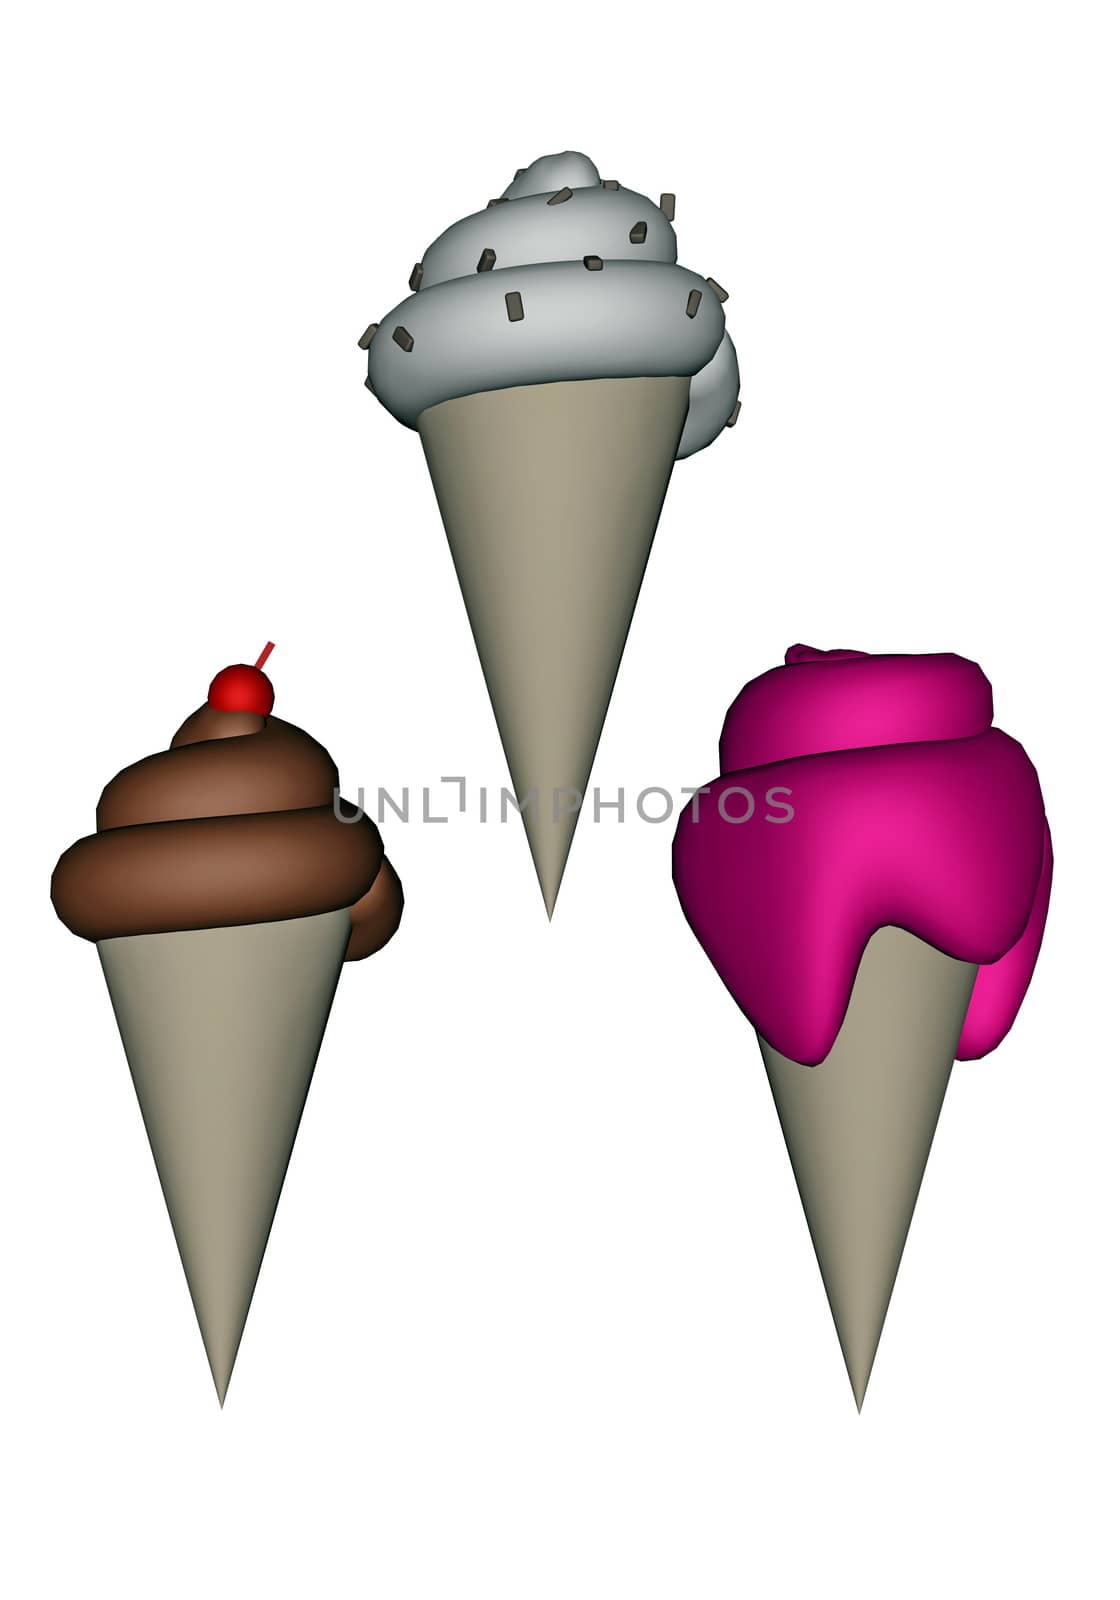 Ice cream cone of three different flavors in white background